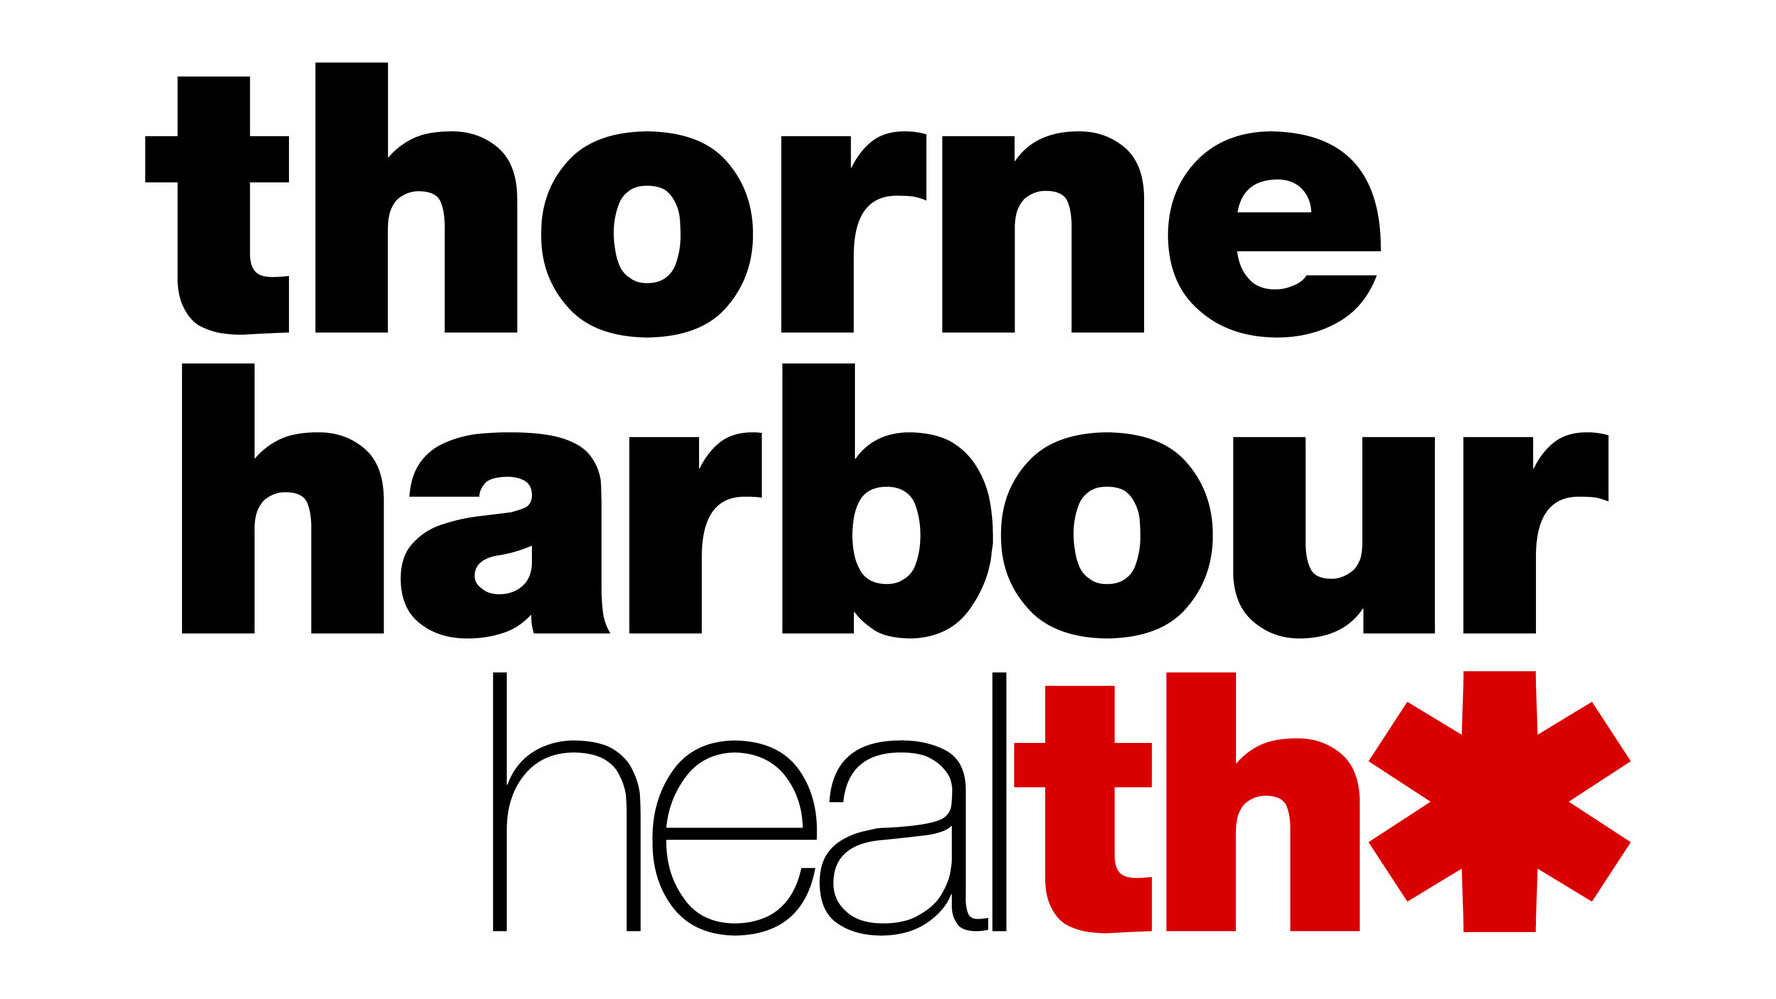 text 'thorne harbour health' with a red asterisk. The last two letters of 'health' are in red.